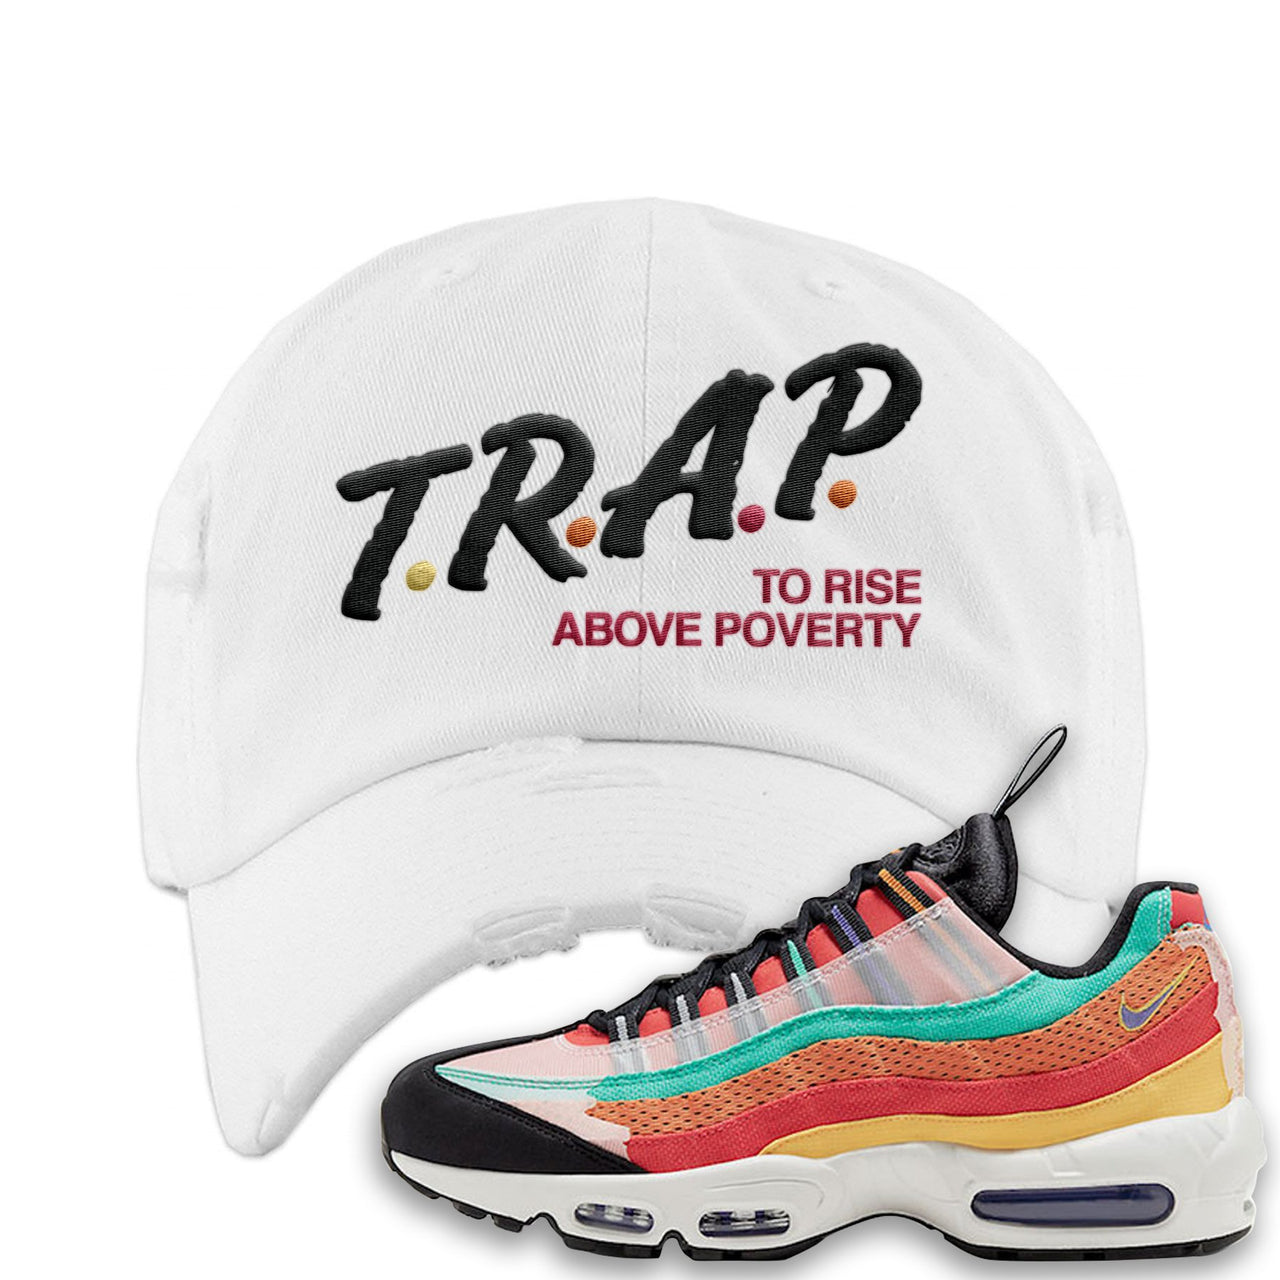 Air Max 95 Black History Month Sneaker White Distressed Dad Hat | Hat to match Nike Air Max 95 Black History Month Shoes | Trap To Rise Above Poverty